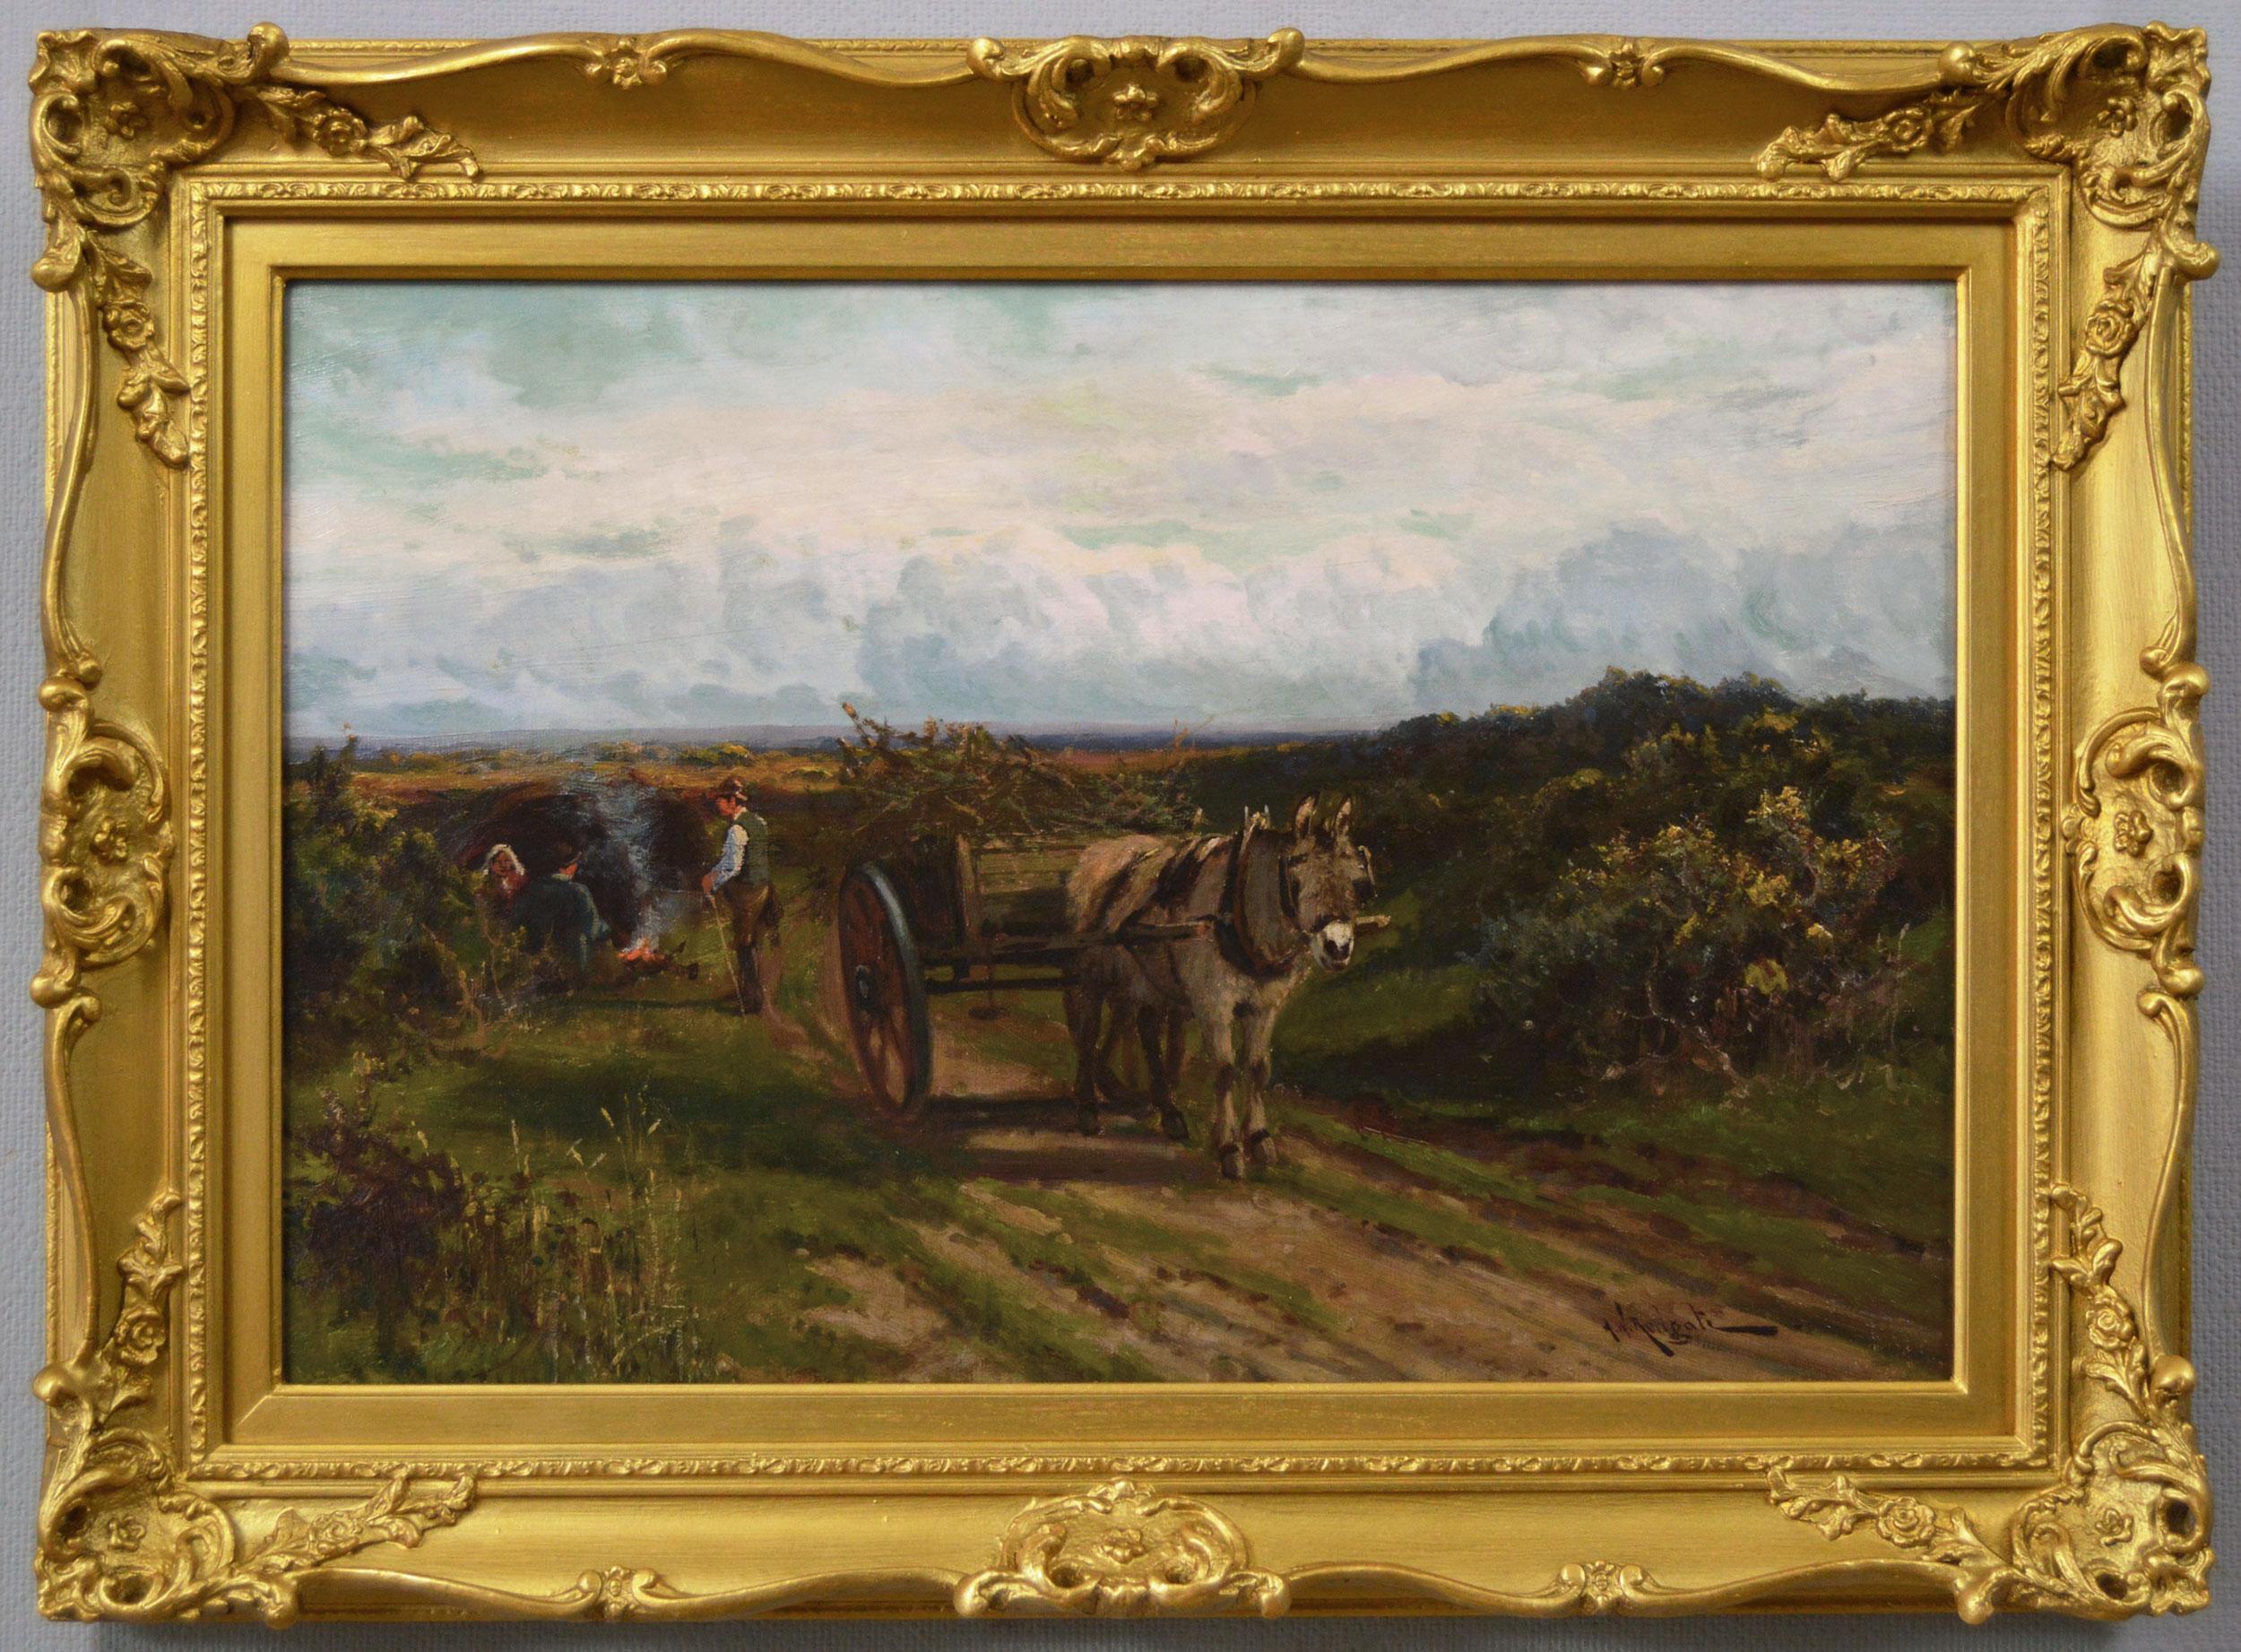 19th Century landscape oil painting of figures with a donkey & cart